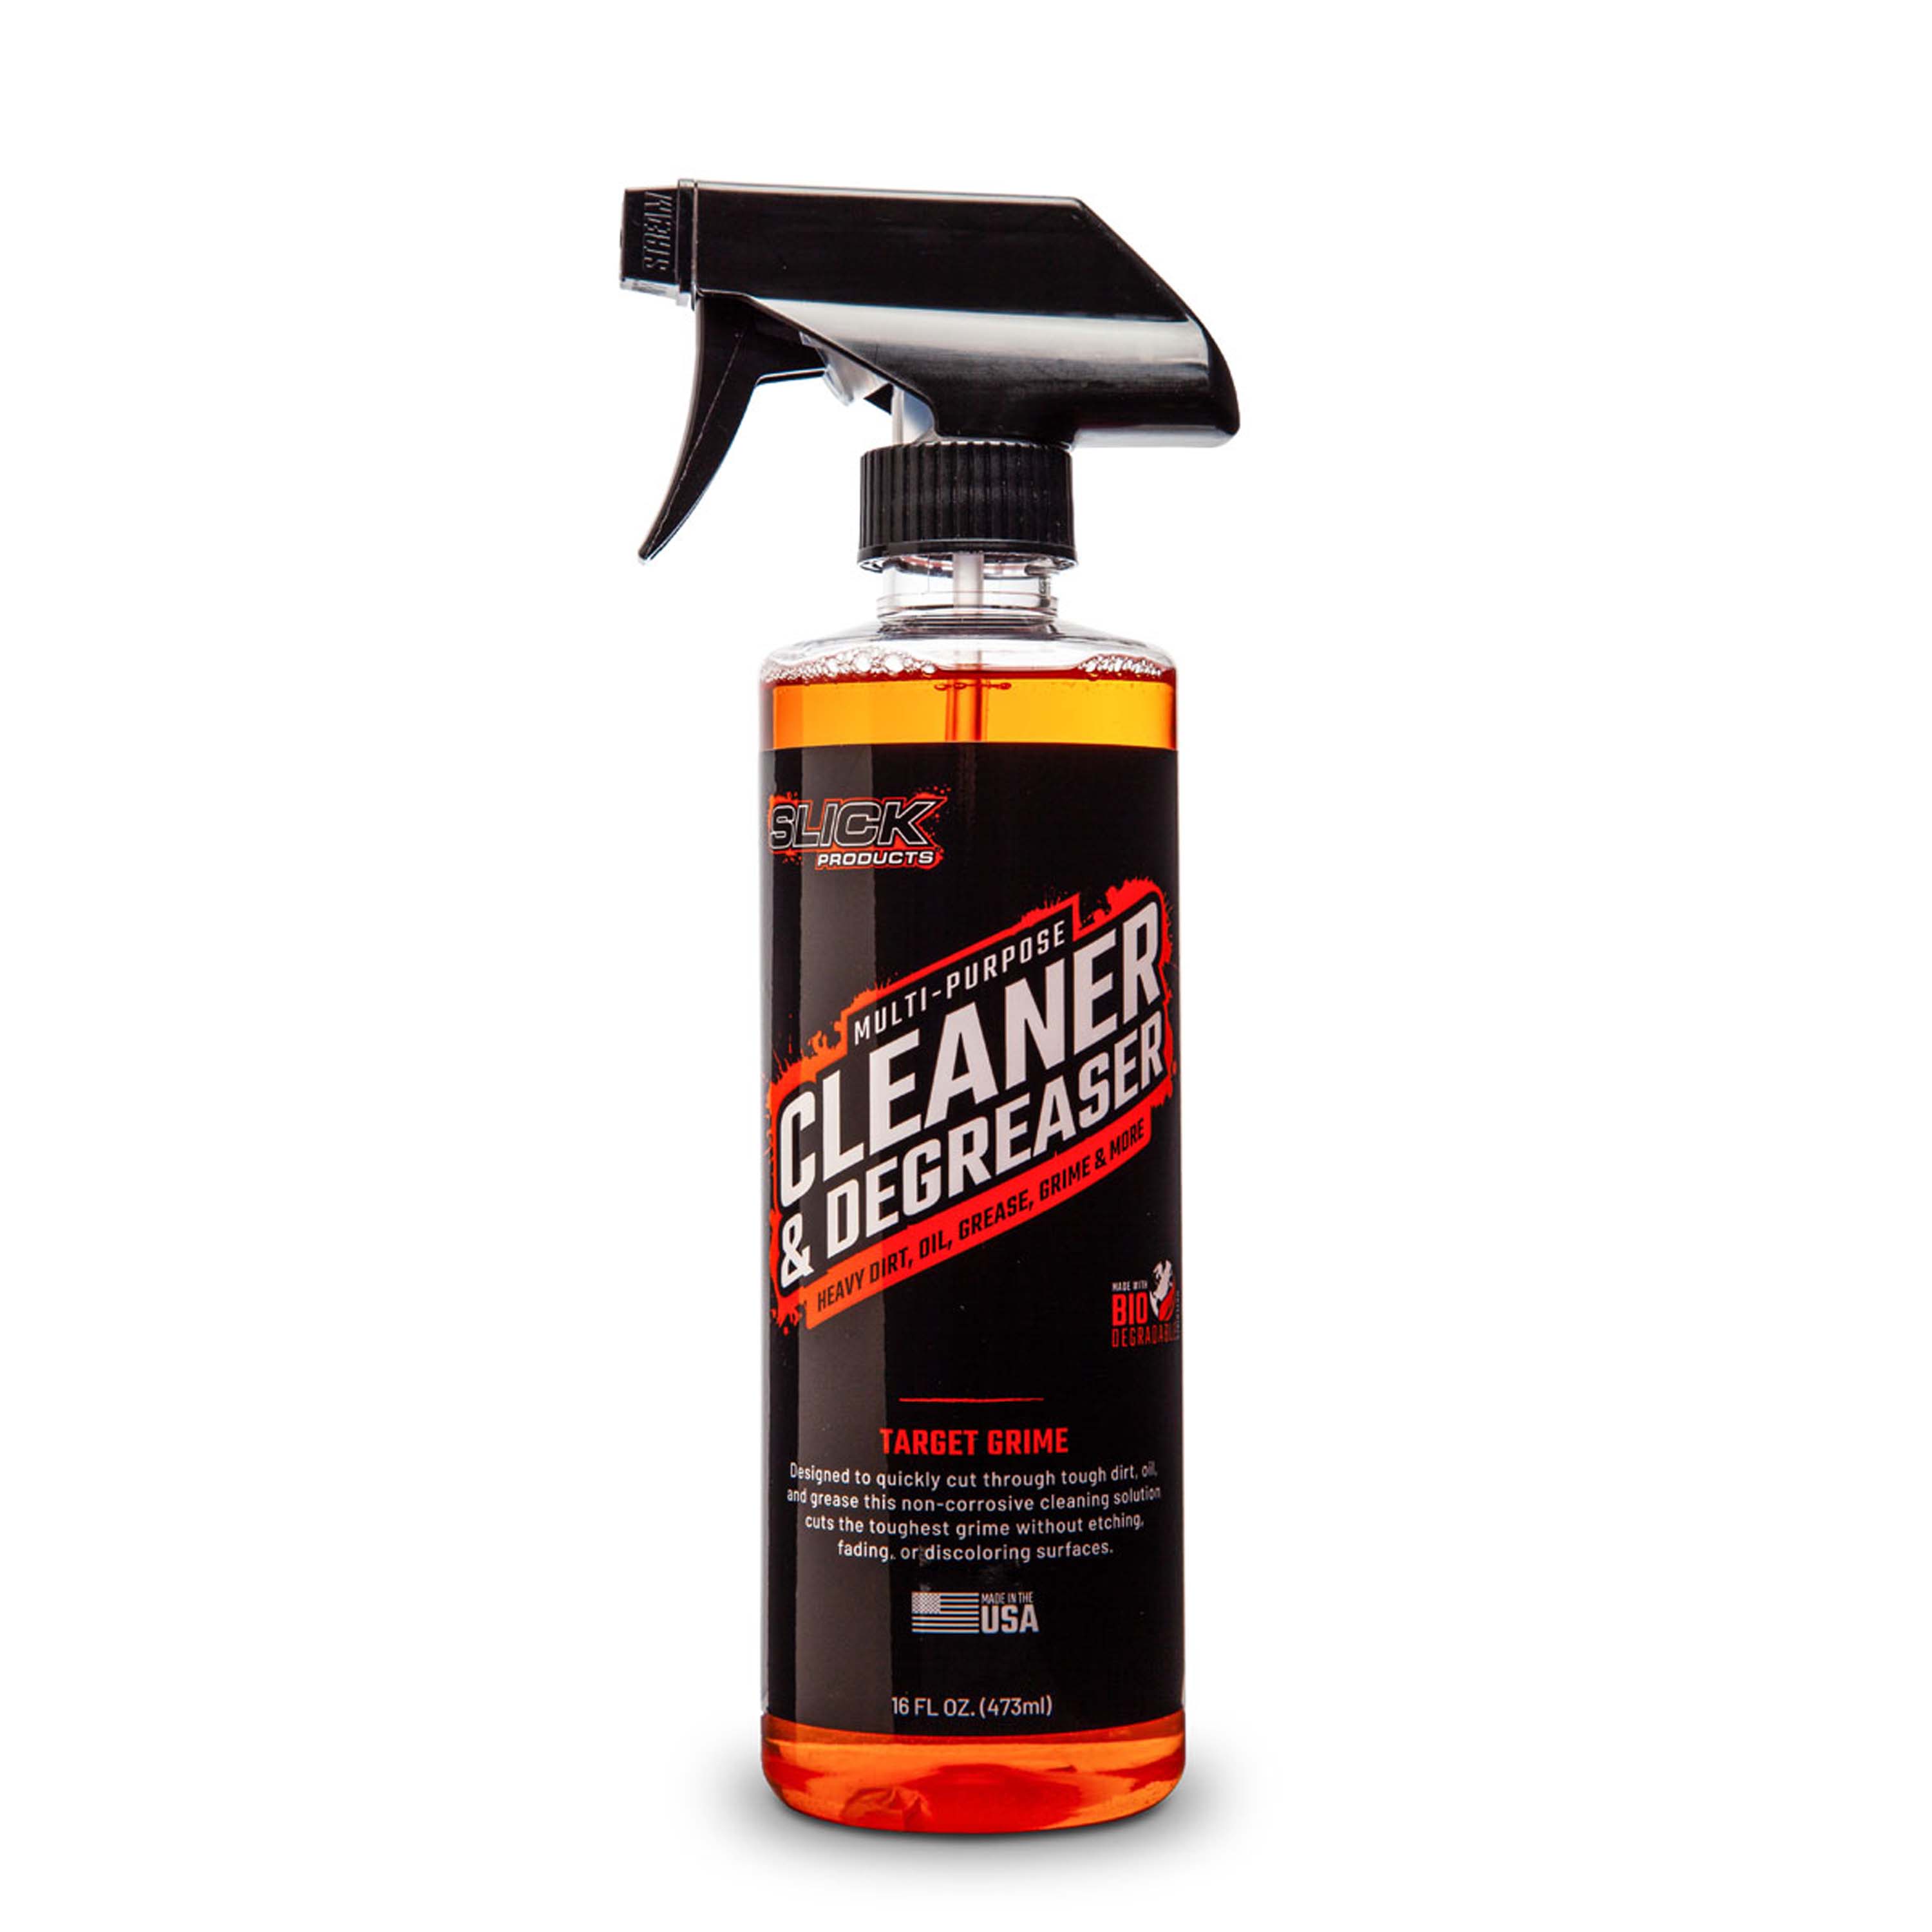 Is this an acceptable degreaser to use on a bike? It foams up when sprayed.  : r/bicycling